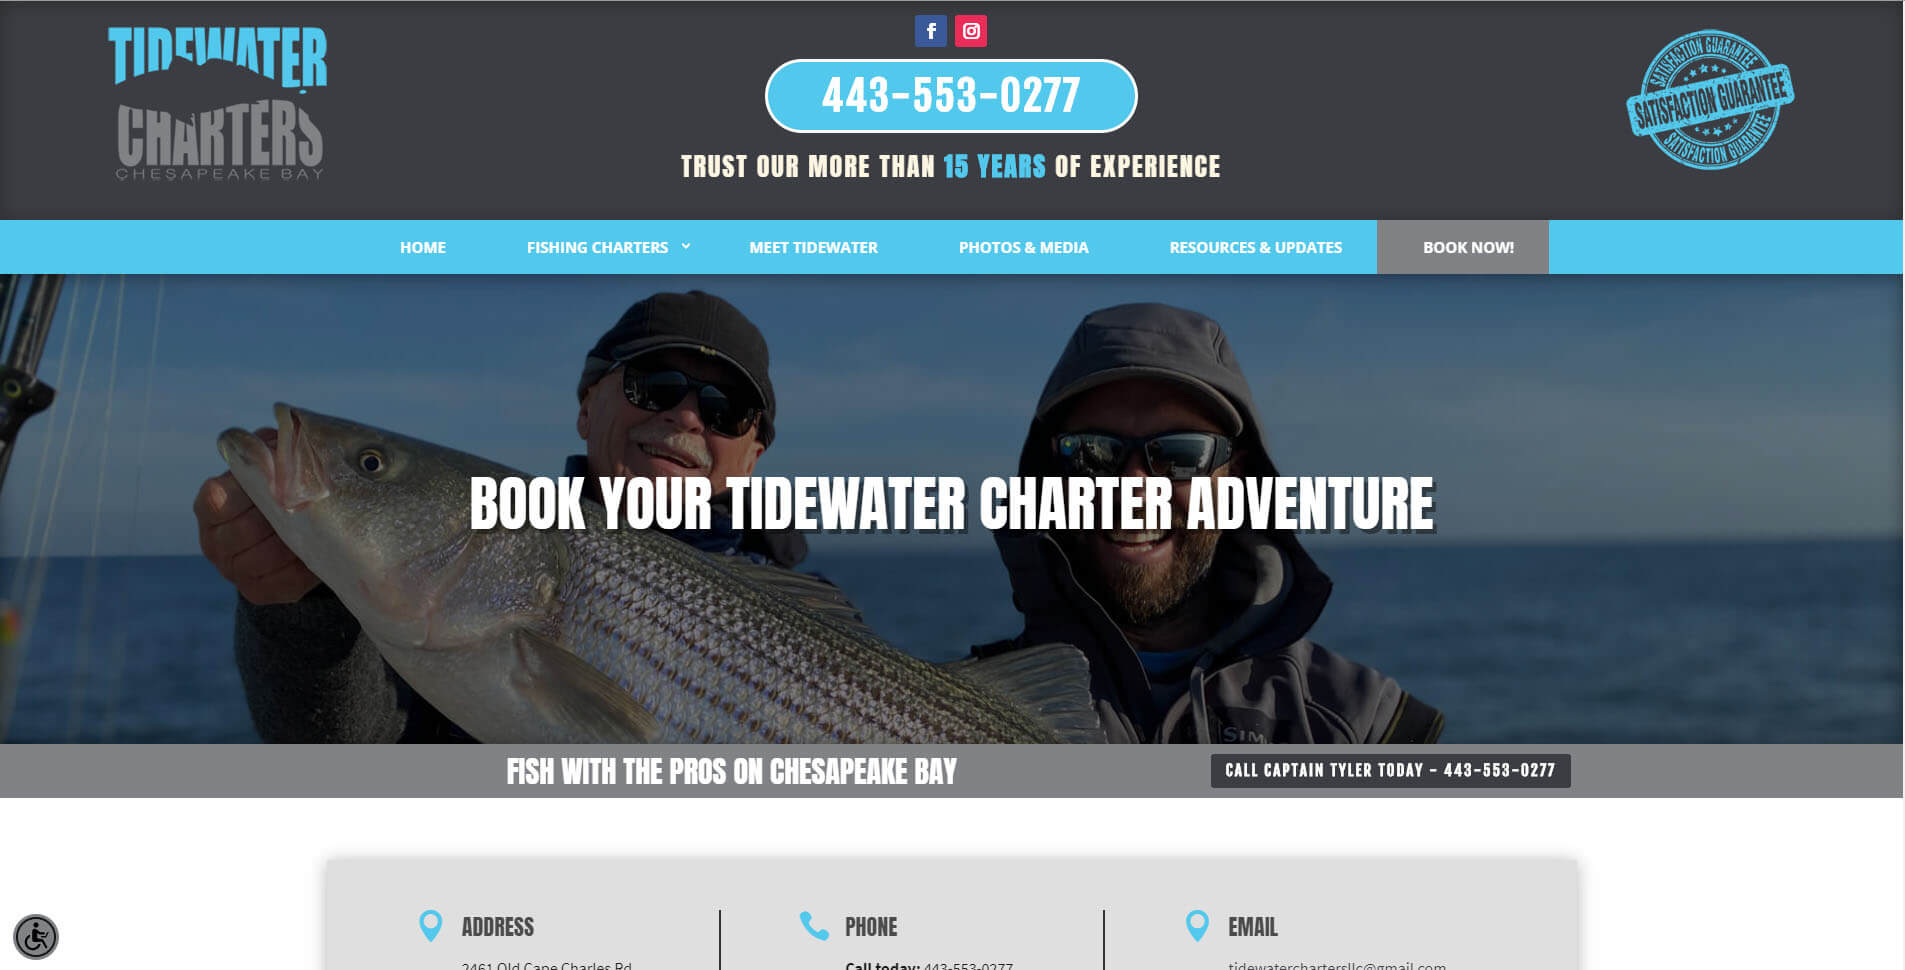 An image of the book now page of Tidewater Charters, website created by Not Fade Away Marketing